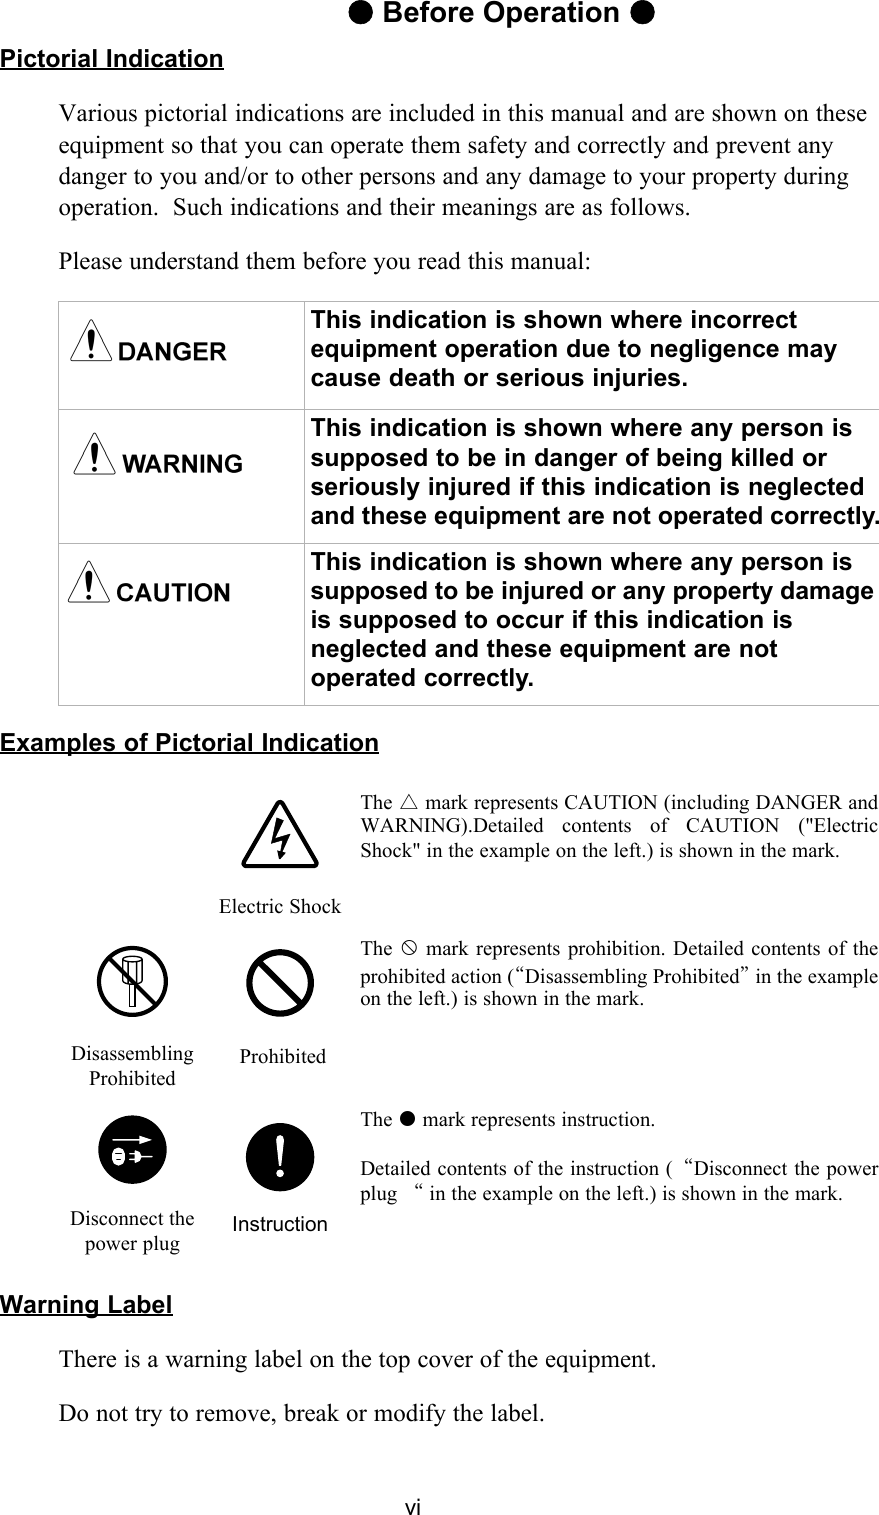 vi●Before Operation ●Pictorial IndicationVarious pictorial indications are included in this manual and are shown on these equipment so that you can operate them safety and correctly and prevent any danger to you and/or to other persons and any damage to your property during operation.  Such indications and their meanings are as follows.Please understand them before you read this manual: Examples of Pictorial IndicationWarning LabelThere is a warning label on the top cover of the equipment.Do not try to remove, break or modify the label.This indication is shown where incorrect equipment operation due to negligence may cause death or serious injuries.This indication is shown where any person is supposed to be in danger of being killed or seriously injured if this indication is neglected and these equipment are not operated correctly.This indication is shown where any person is supposed to be injured or any property damage is supposed to occur if this indication is neglected and these equipment are not operated correctly.Electric ShockThe △ mark represents CAUTION (including DANGER andWARNING).Detailed contents of CAUTION (&quot;ElectricShock&quot; in the example on the left.) is shown in the mark.Disassembling Prohibited ProhibitedThe  mark represents prohibition. Detailed contents of theprohibited action (“Disassembling Prohibited” in the exampleon the left.) is shown in the mark.Disconnect the power plug InstructionThe  mark represents instruction.Detailed contents of the instruction (“Disconnect the powerplug “ in the example on the left.) is shown in the mark.!